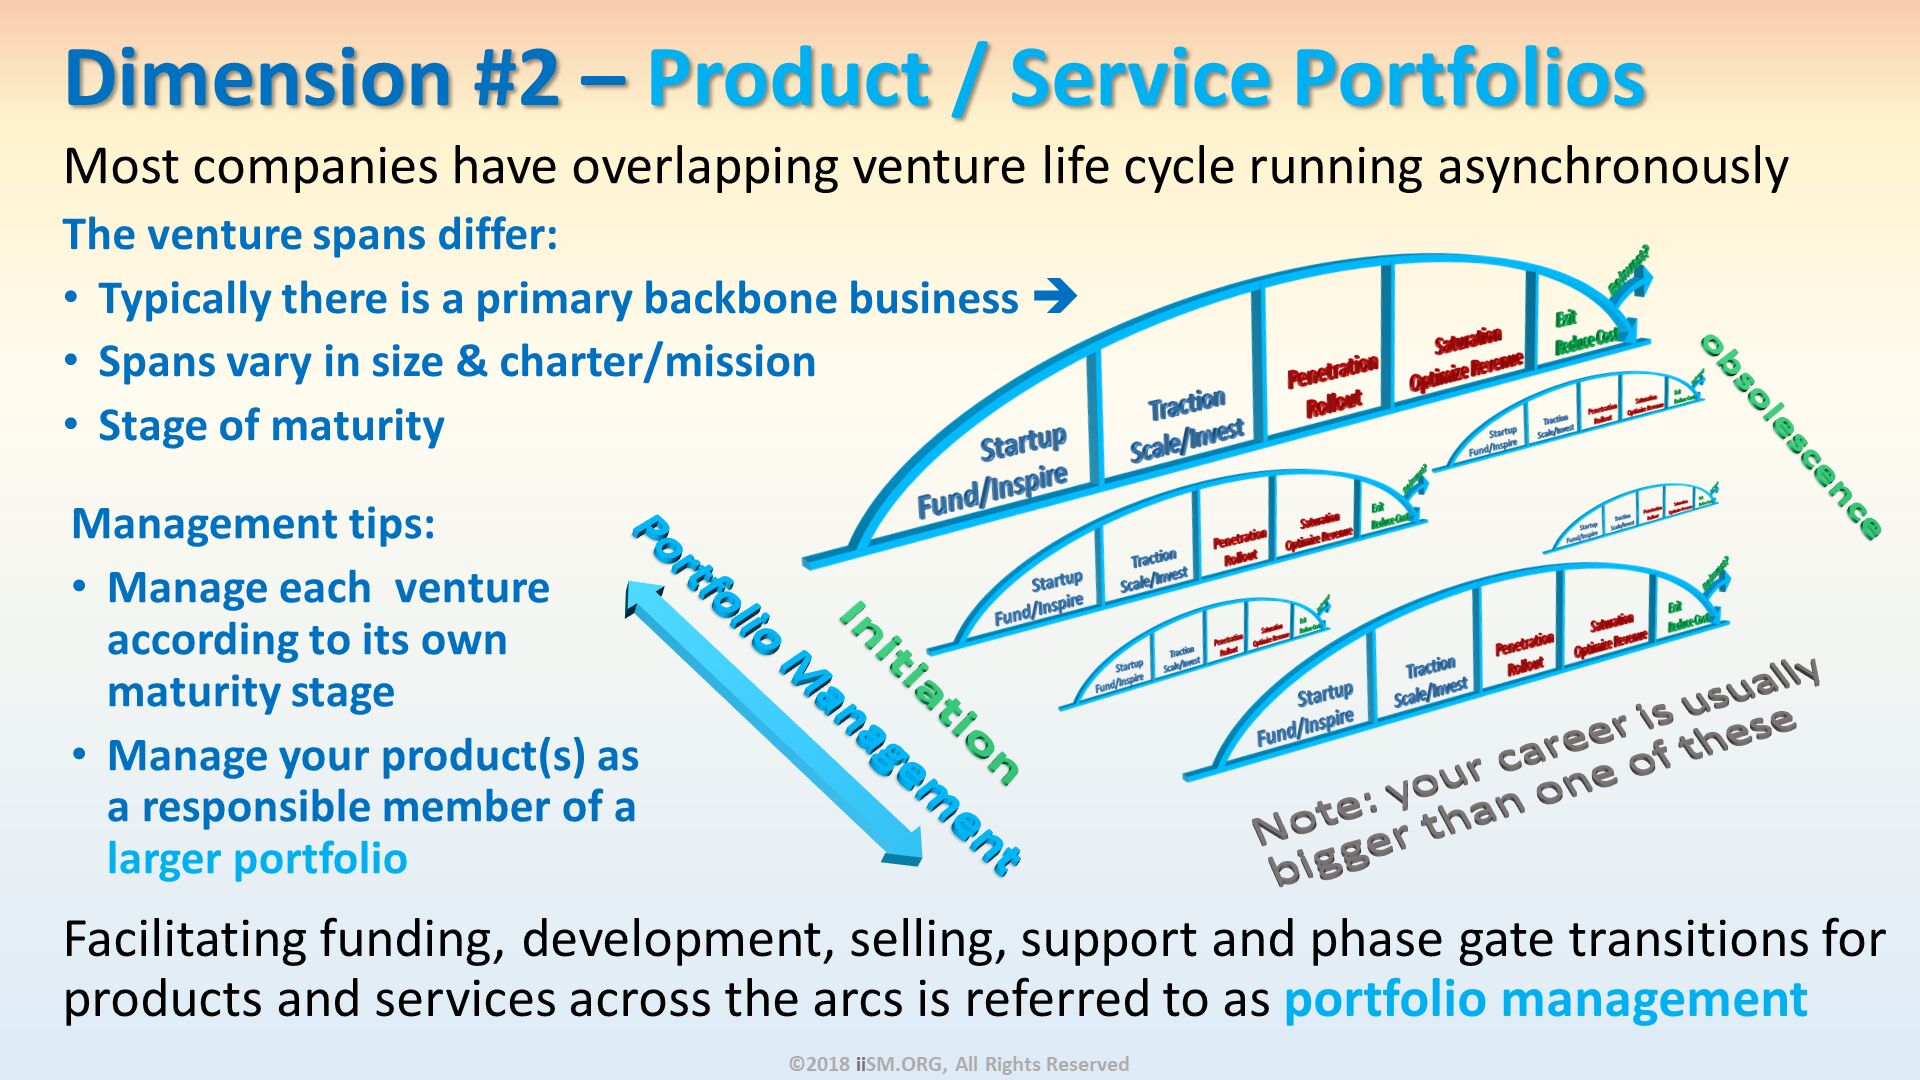 Most companies have overlapping venture life cycle running asynchronously
The venture spans differ:
Typically there is a primary backbone business 
Spans vary in size & charter/mission
Stage of maturity
. Dimension #2 – Product / Service Portfolios . Facilitating funding, development, selling, support and phase gate transitions for products and services across the arcs is referred to as portfolio management. Note: your career is usually bigger than one of these. Initiation. ©2018 iiSM.ORG, All Rights Reserved. Management tips:
Manage each  venture according to its ownmaturity stage
Manage your product(s) as a responsible member of a larger portfolio. 